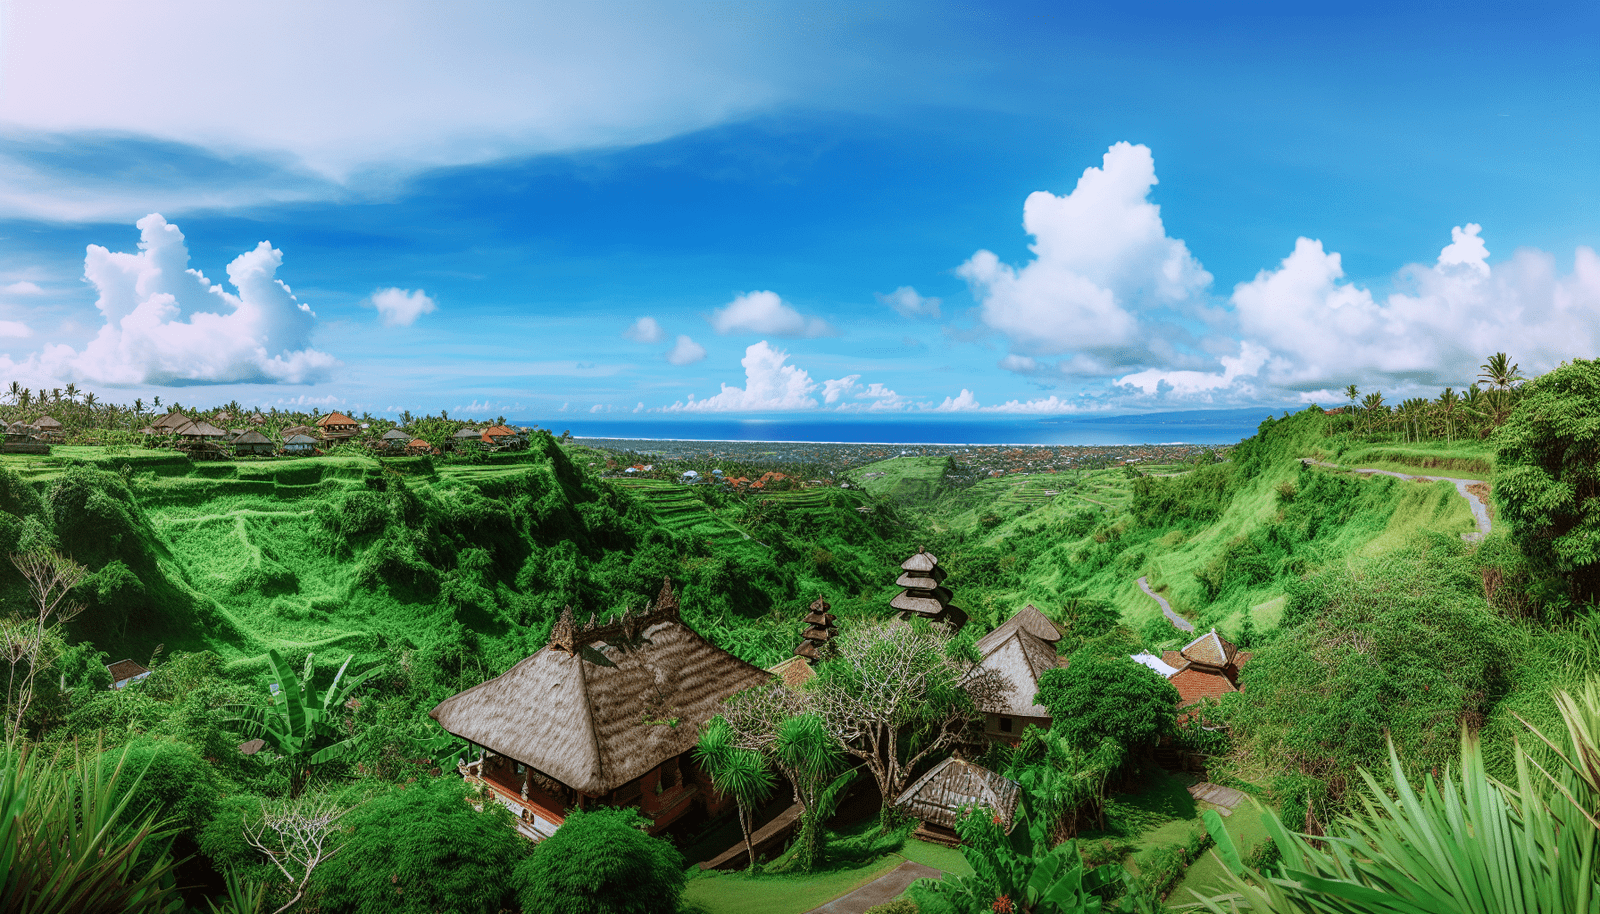 Scenic view of Bali landscape with lush greenery and traditional architecture